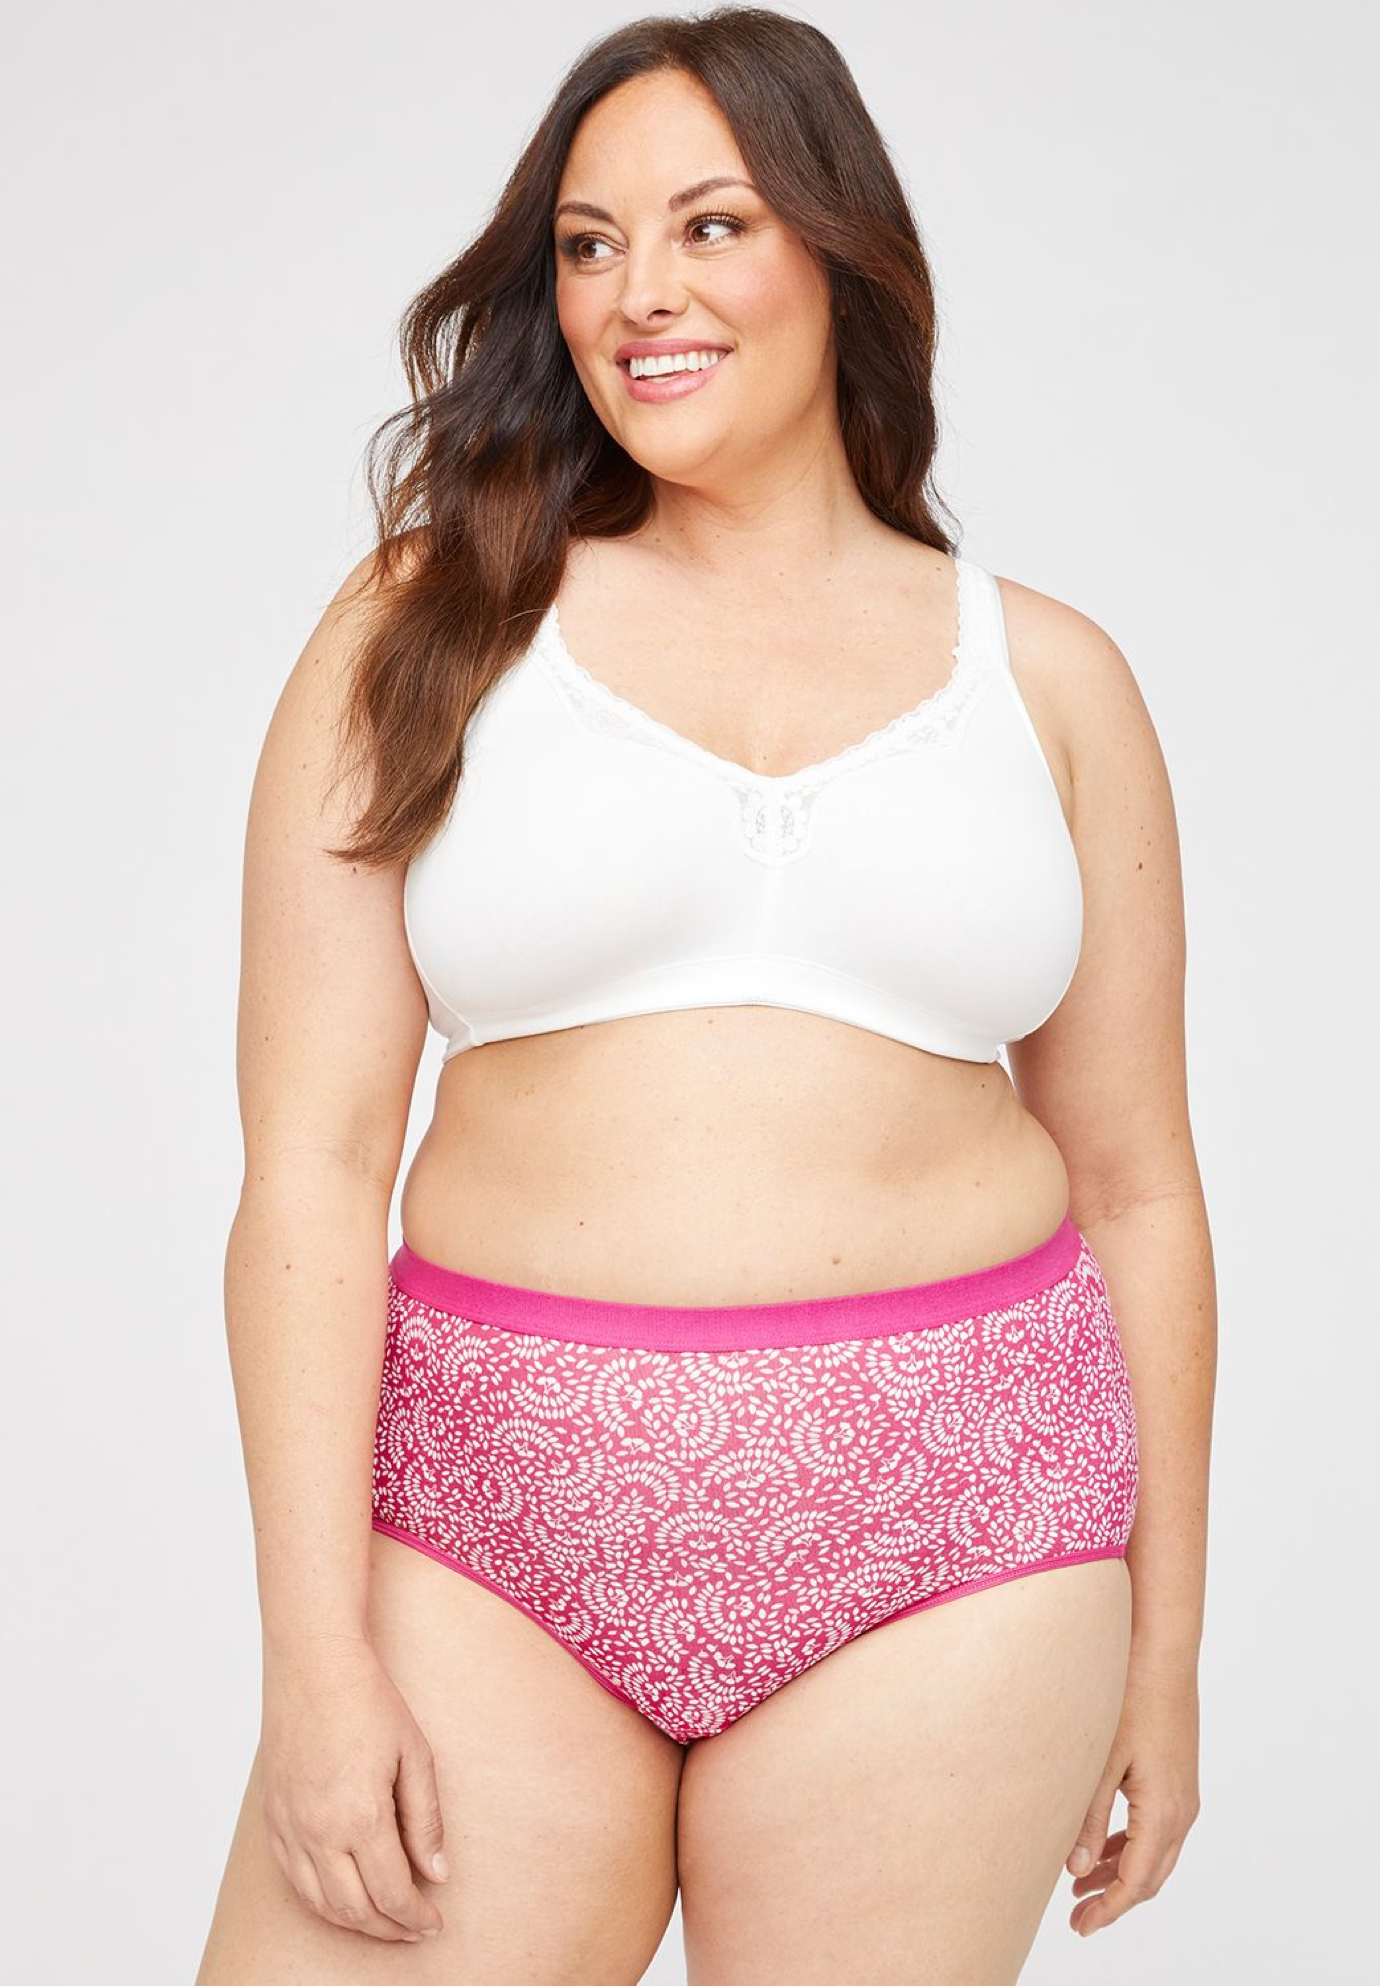 Catherines Plus Sizes - Also introducing: Intimates For All! Find